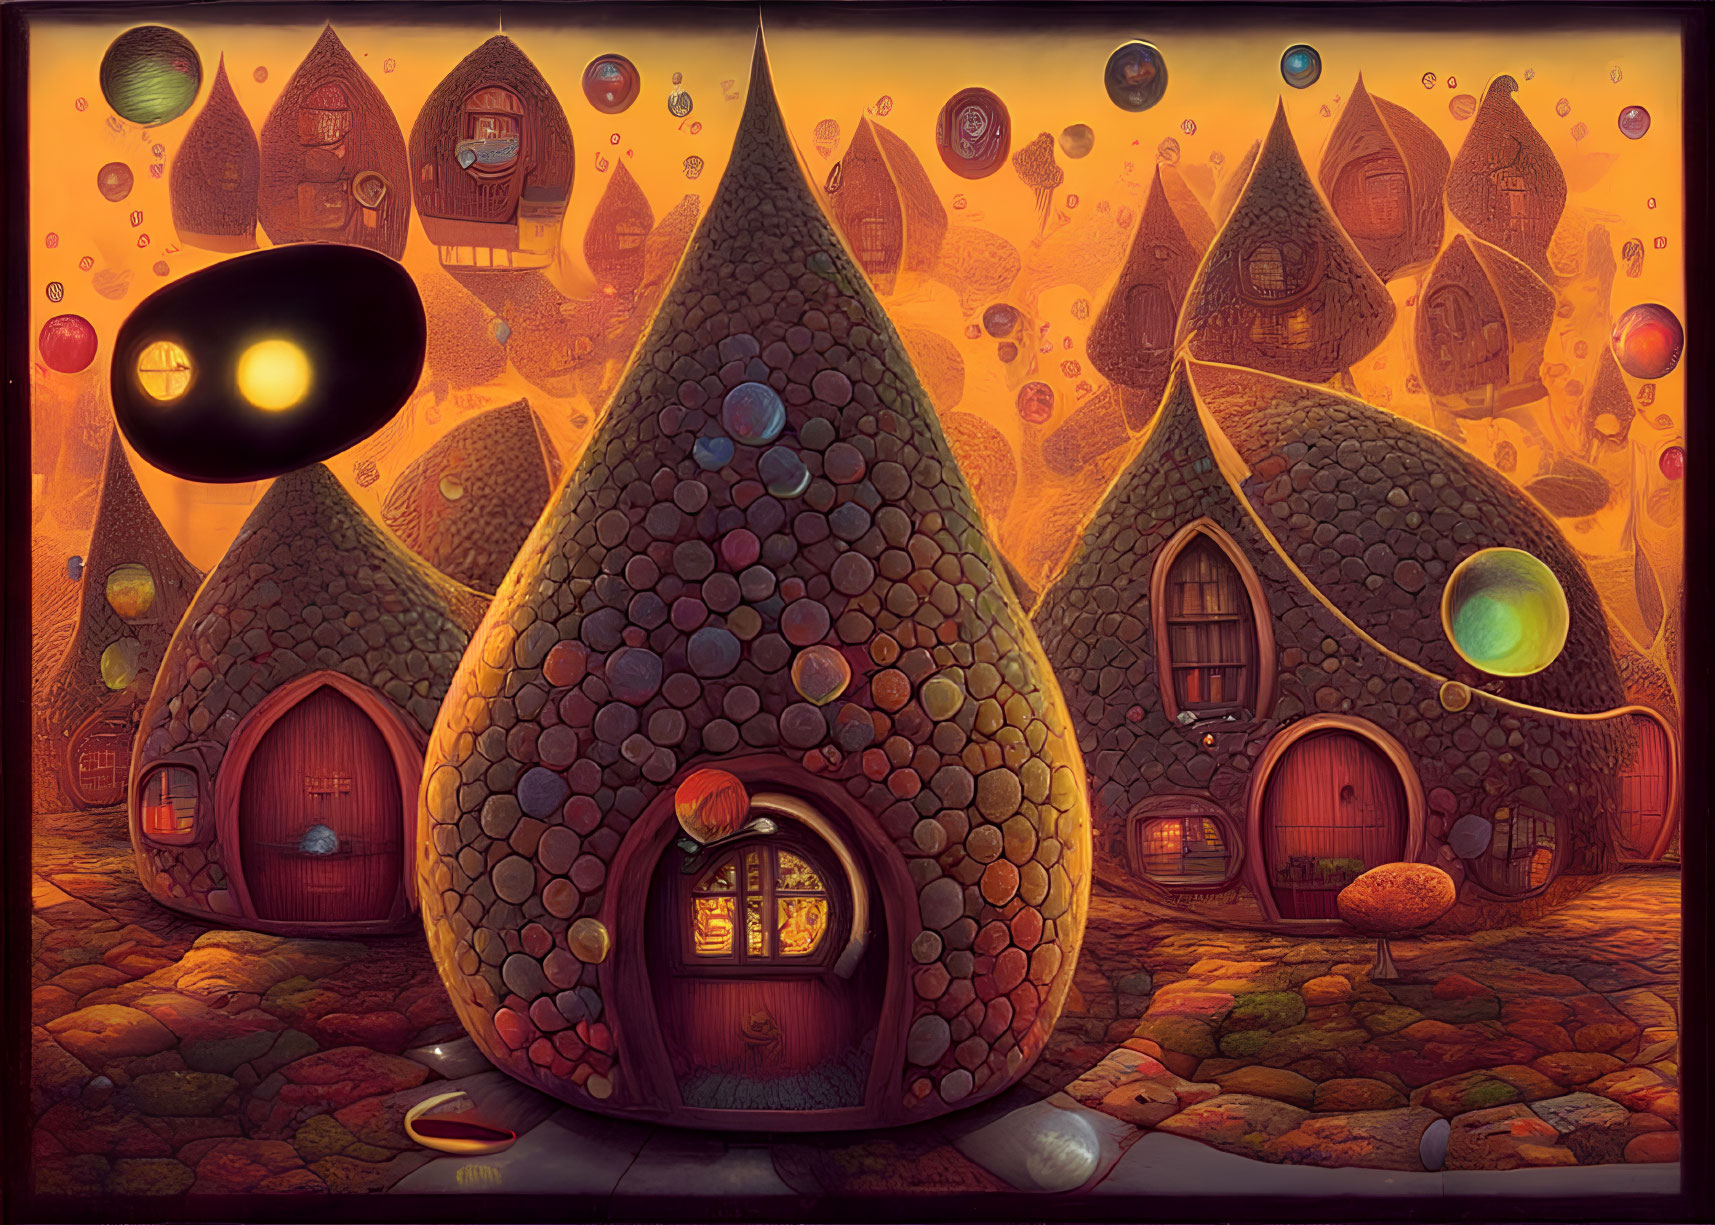 Whimsical pebble-covered houses in fantastical landscape